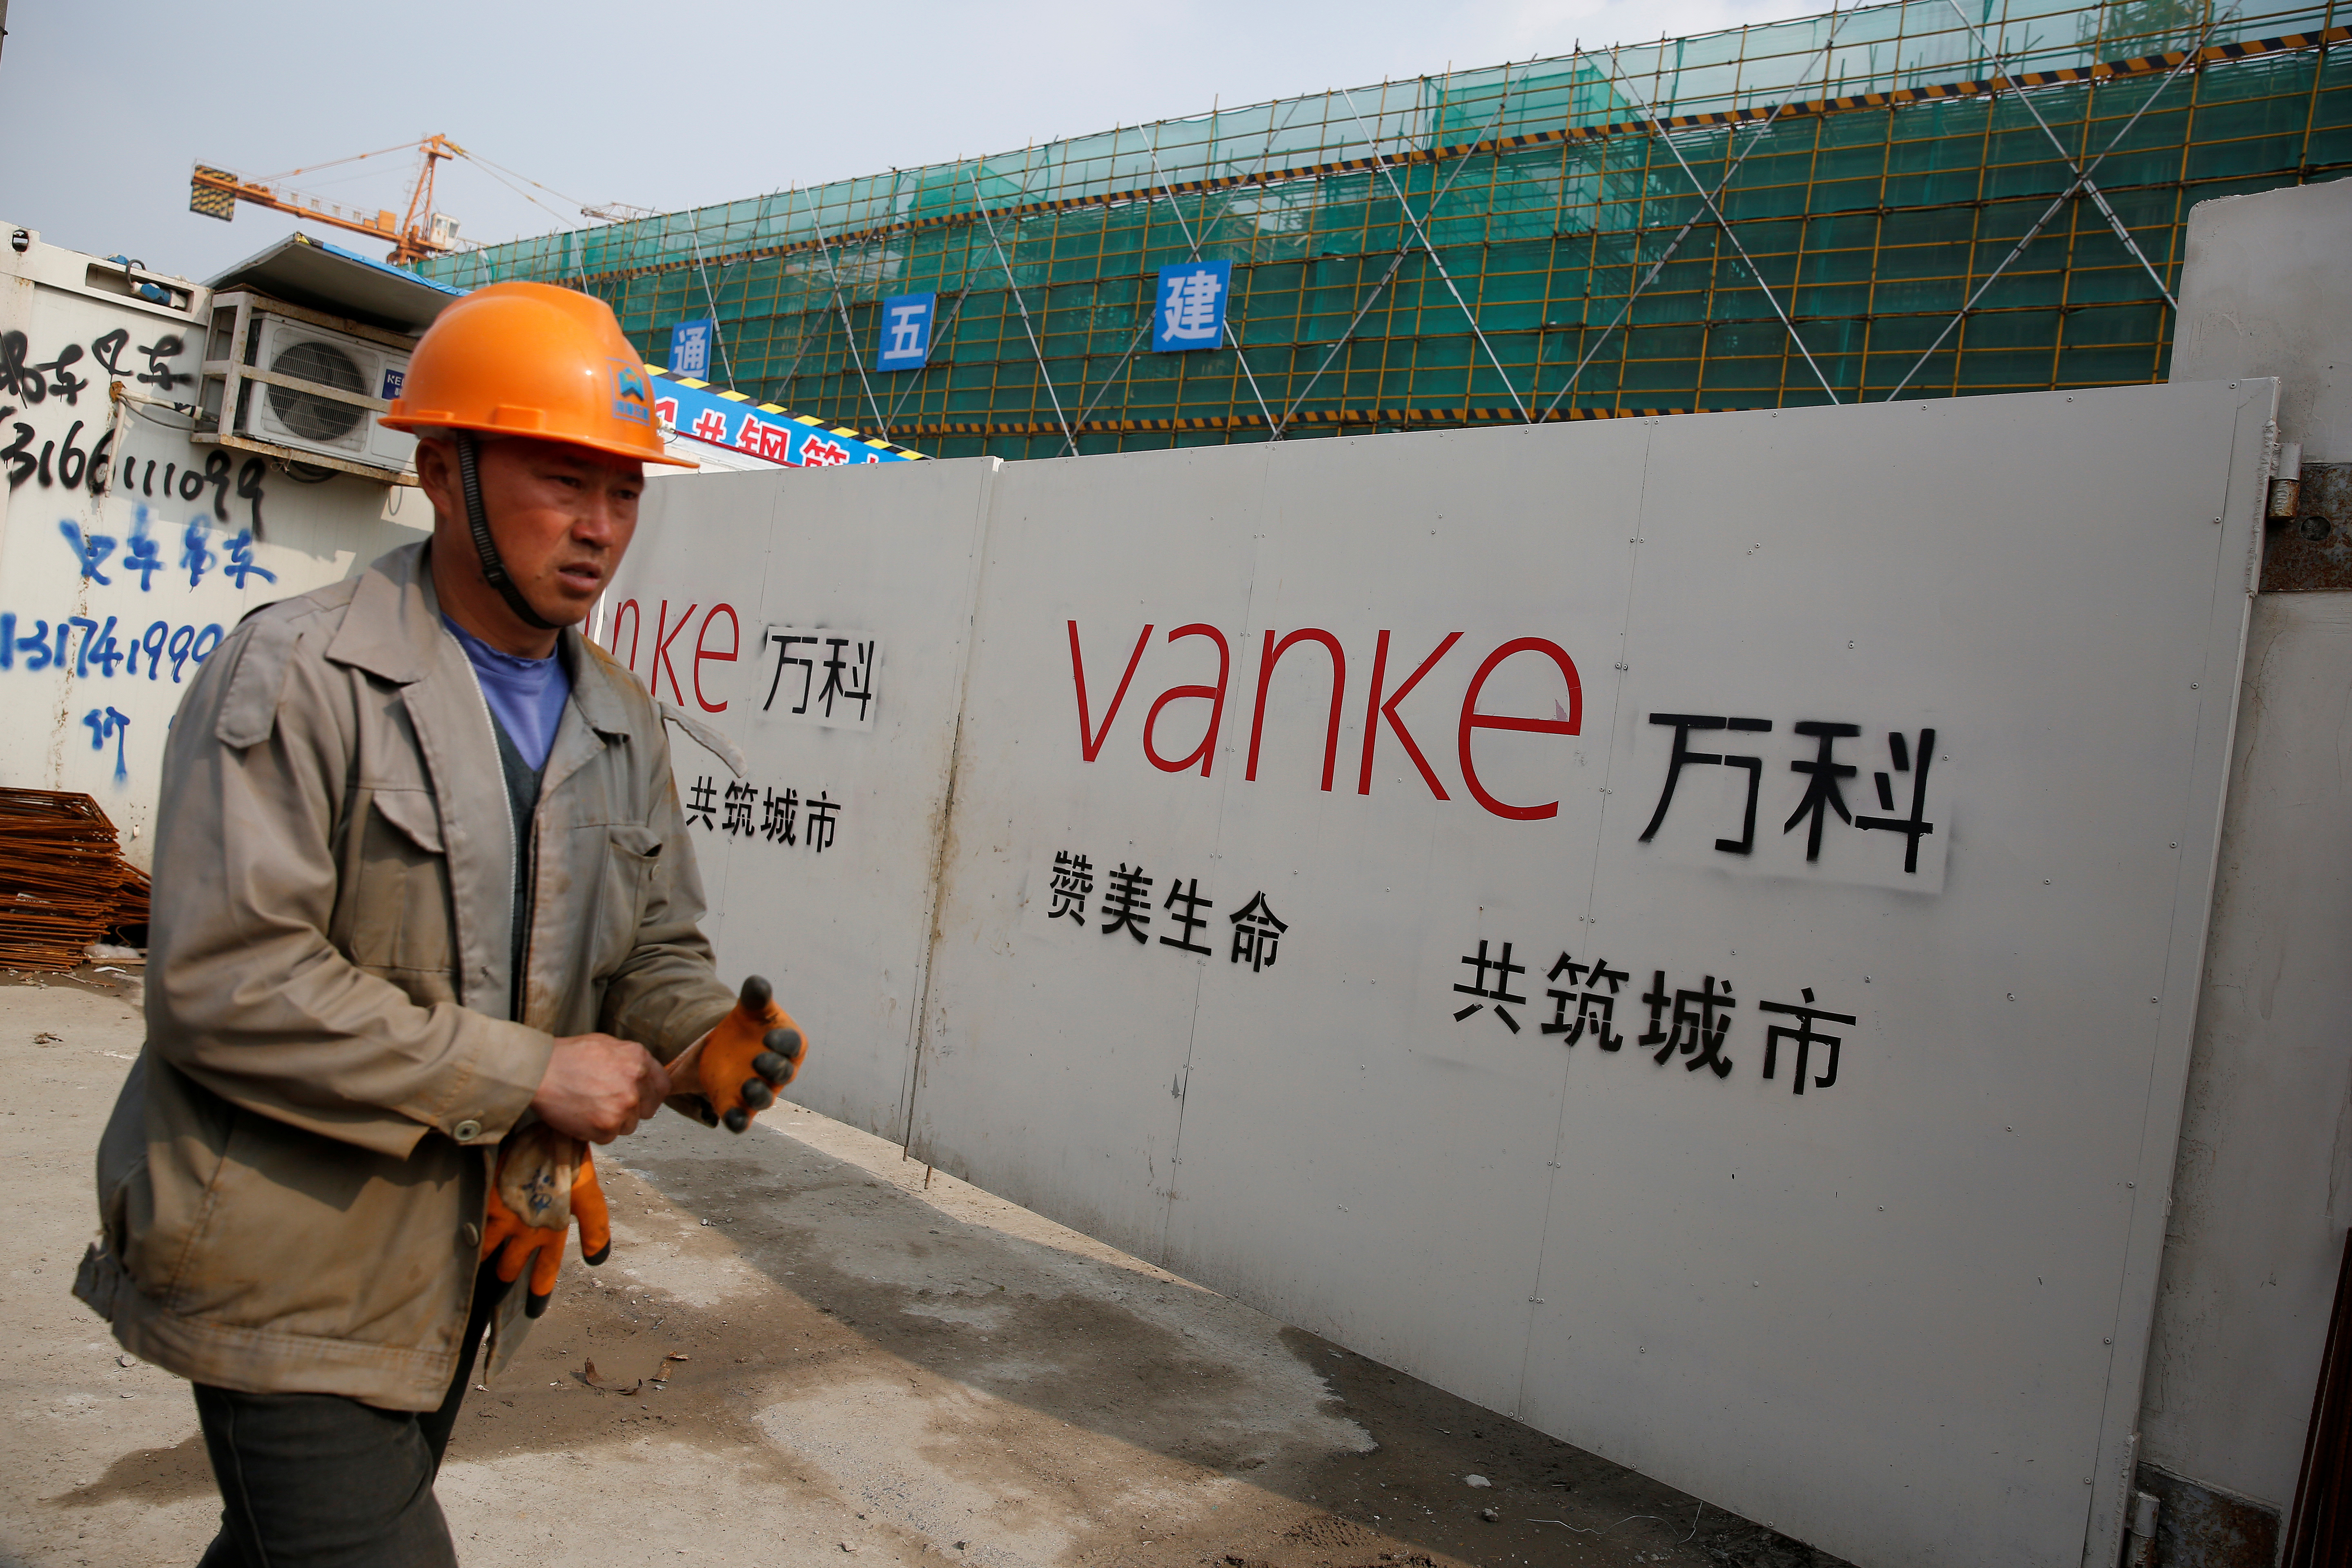 A person walks past by a gate with a sign of Vanke at a construction site in Shanghai